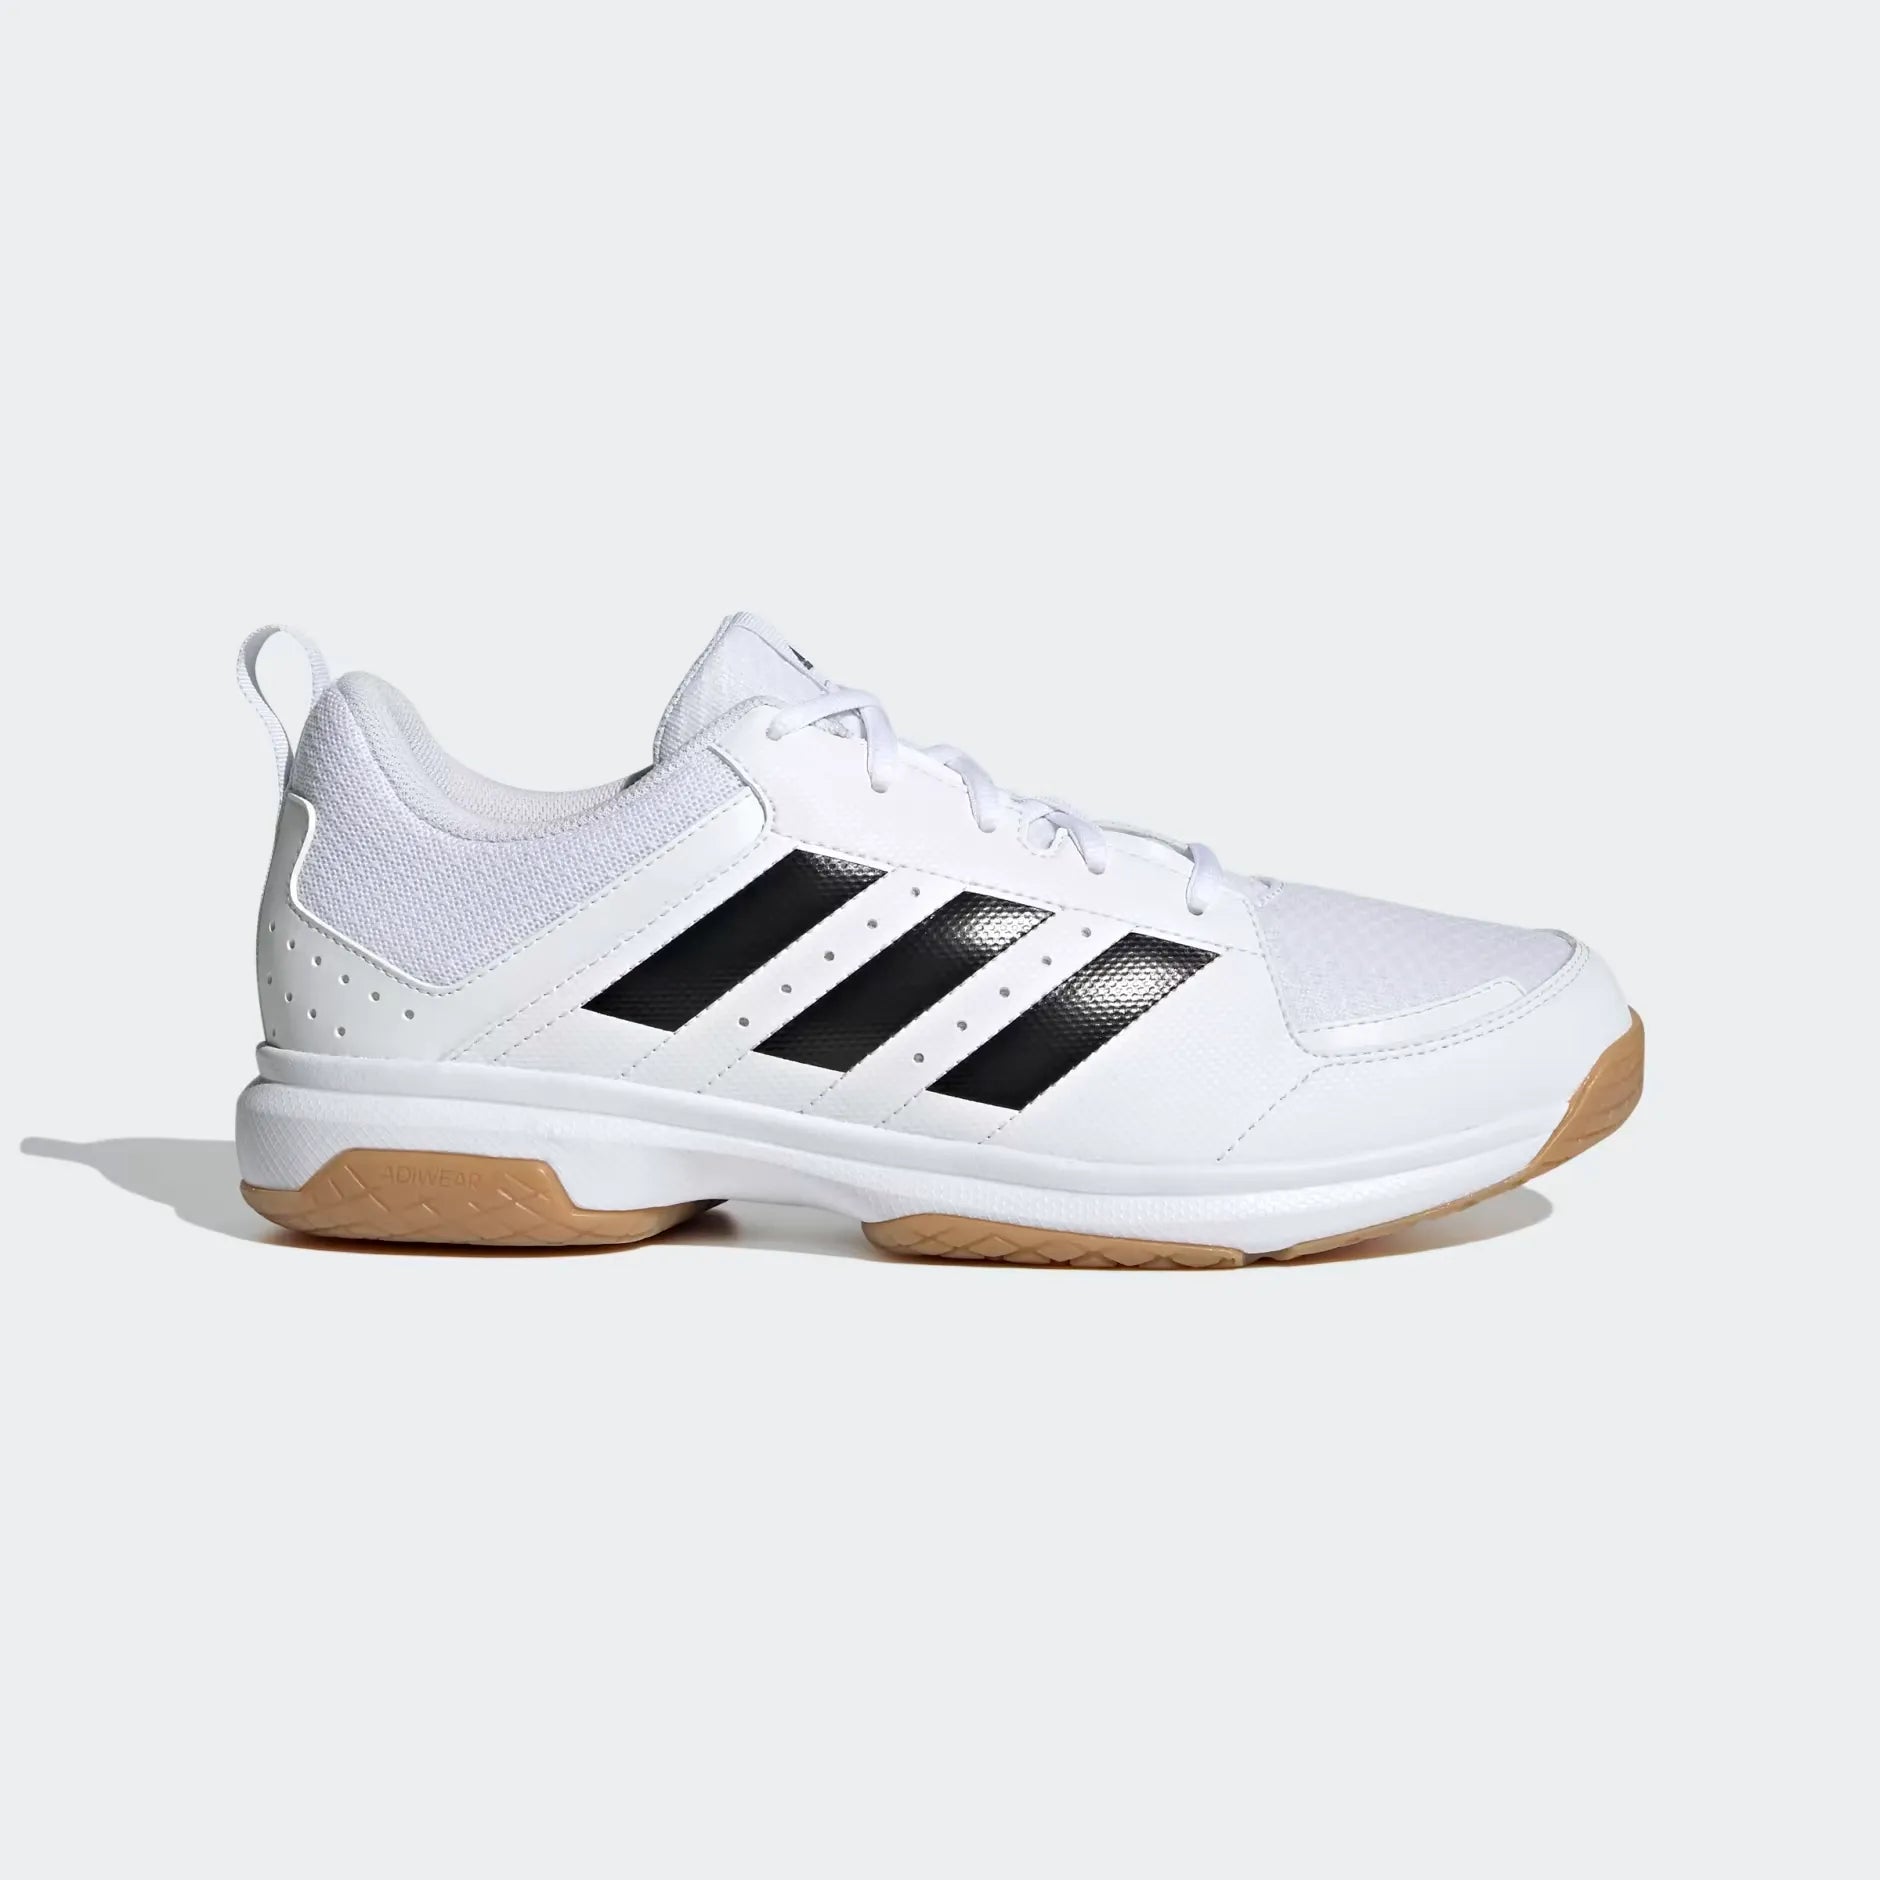 Adidas Ligra 7 GZ0069 White sneakers. Shop these lightweight and sleek shoes for men, perfect for everyday wear.